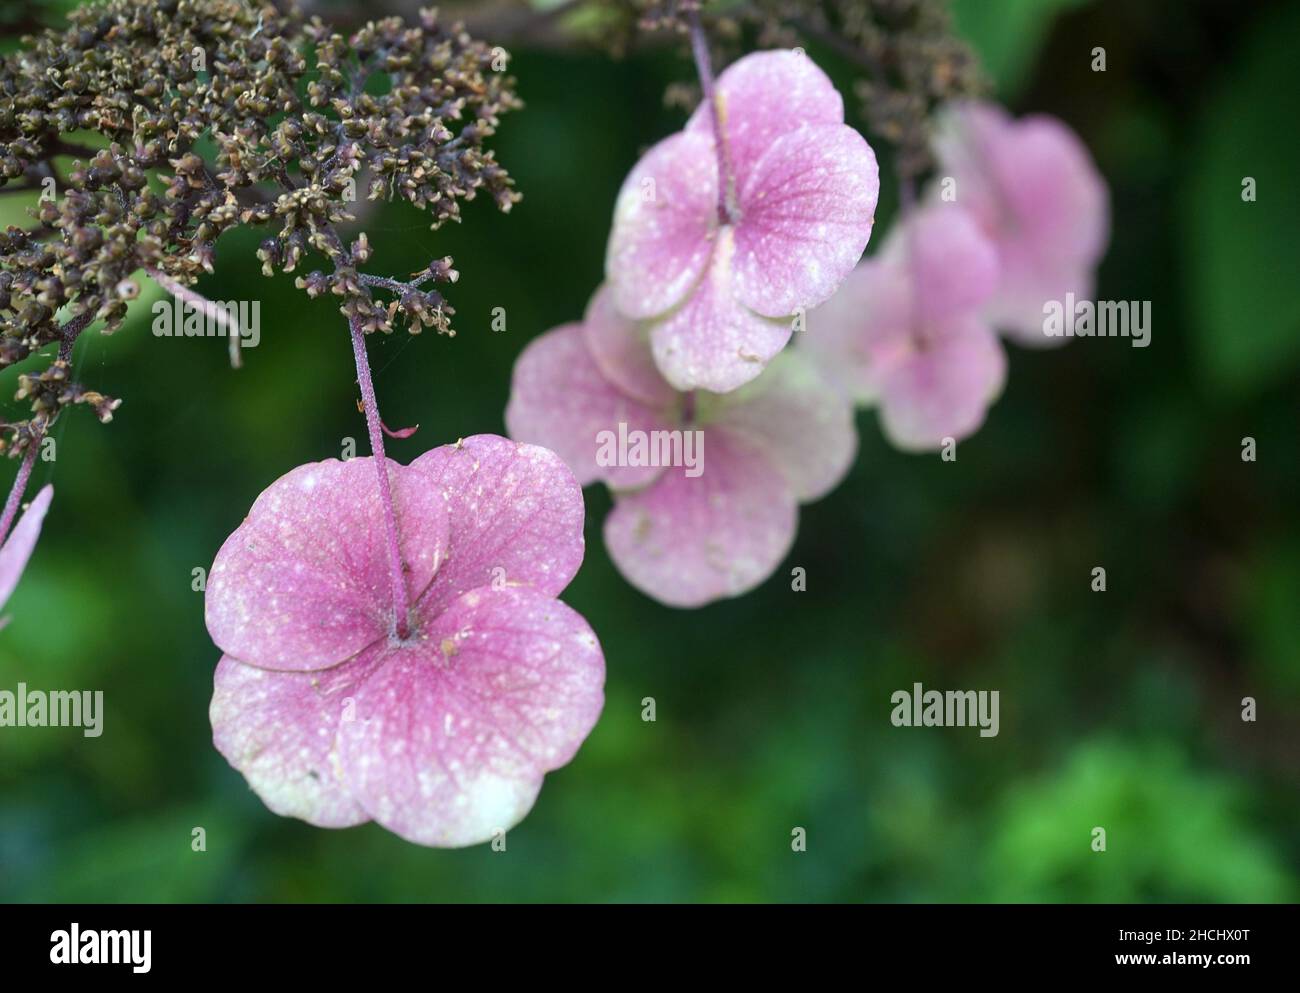 Lovely soft antique pink-white flowers of a hydrangea aspera. The green background is blurred Stock Photo